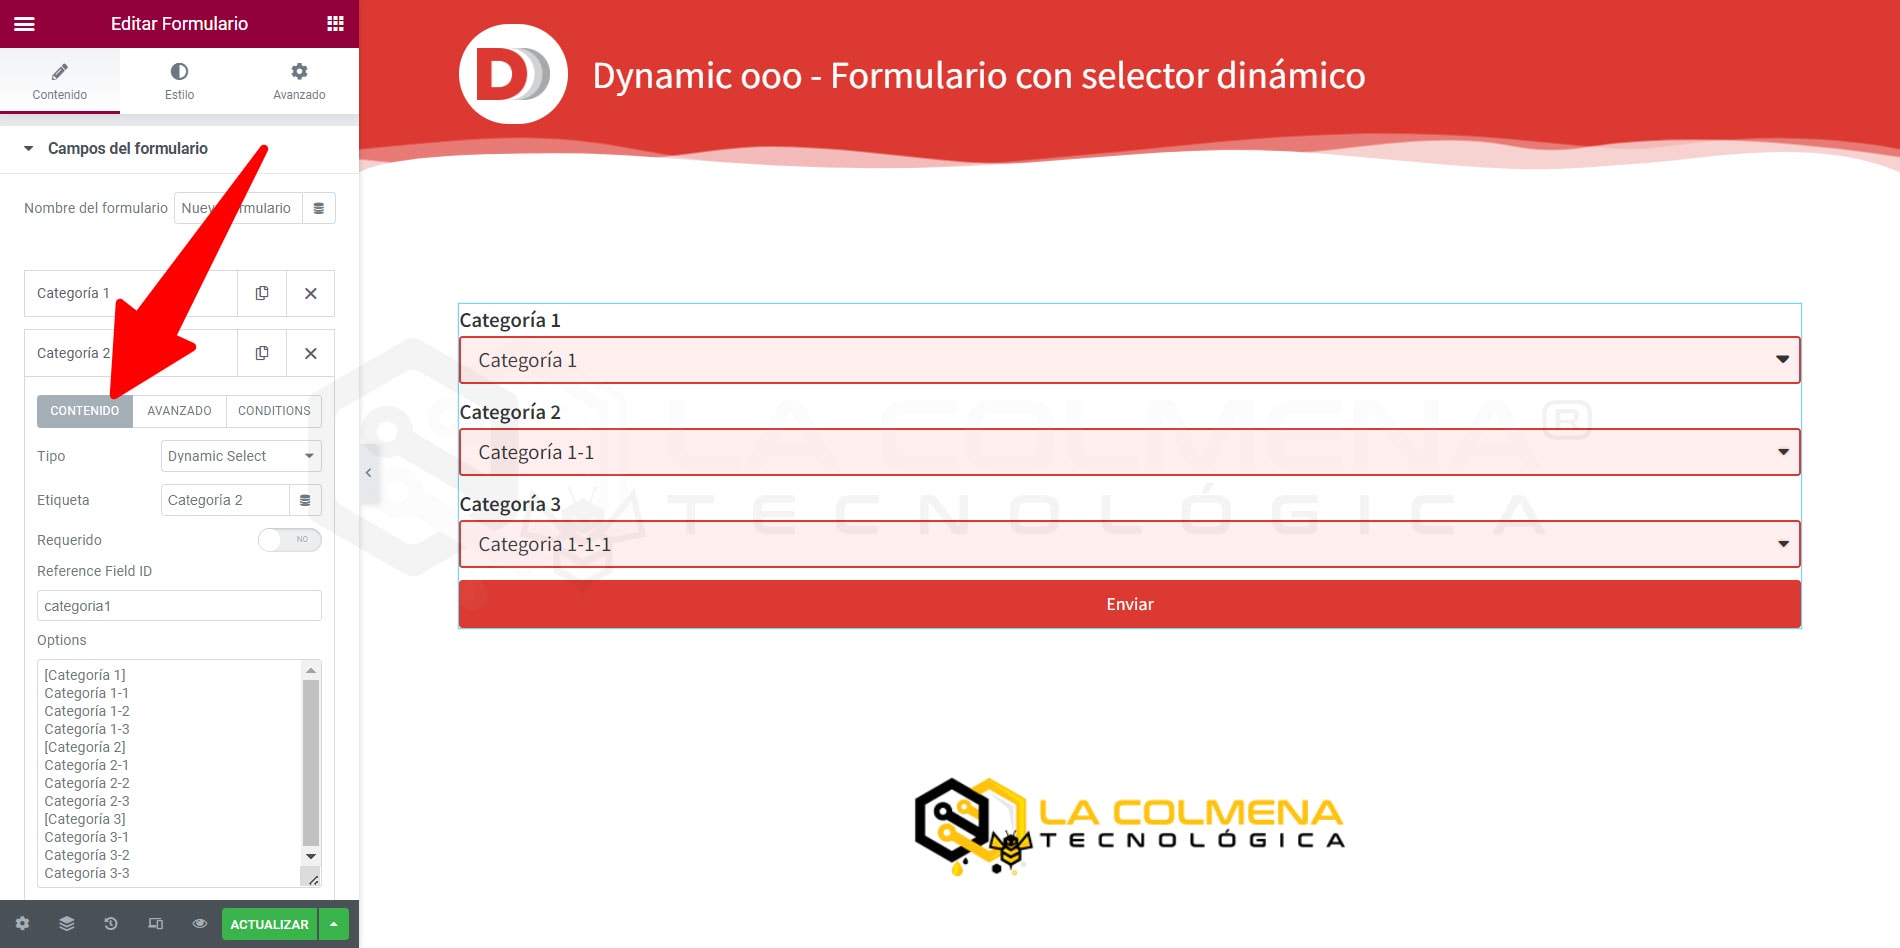 Form with dynamic selector that changes according to the value of another field with dynamic ooo